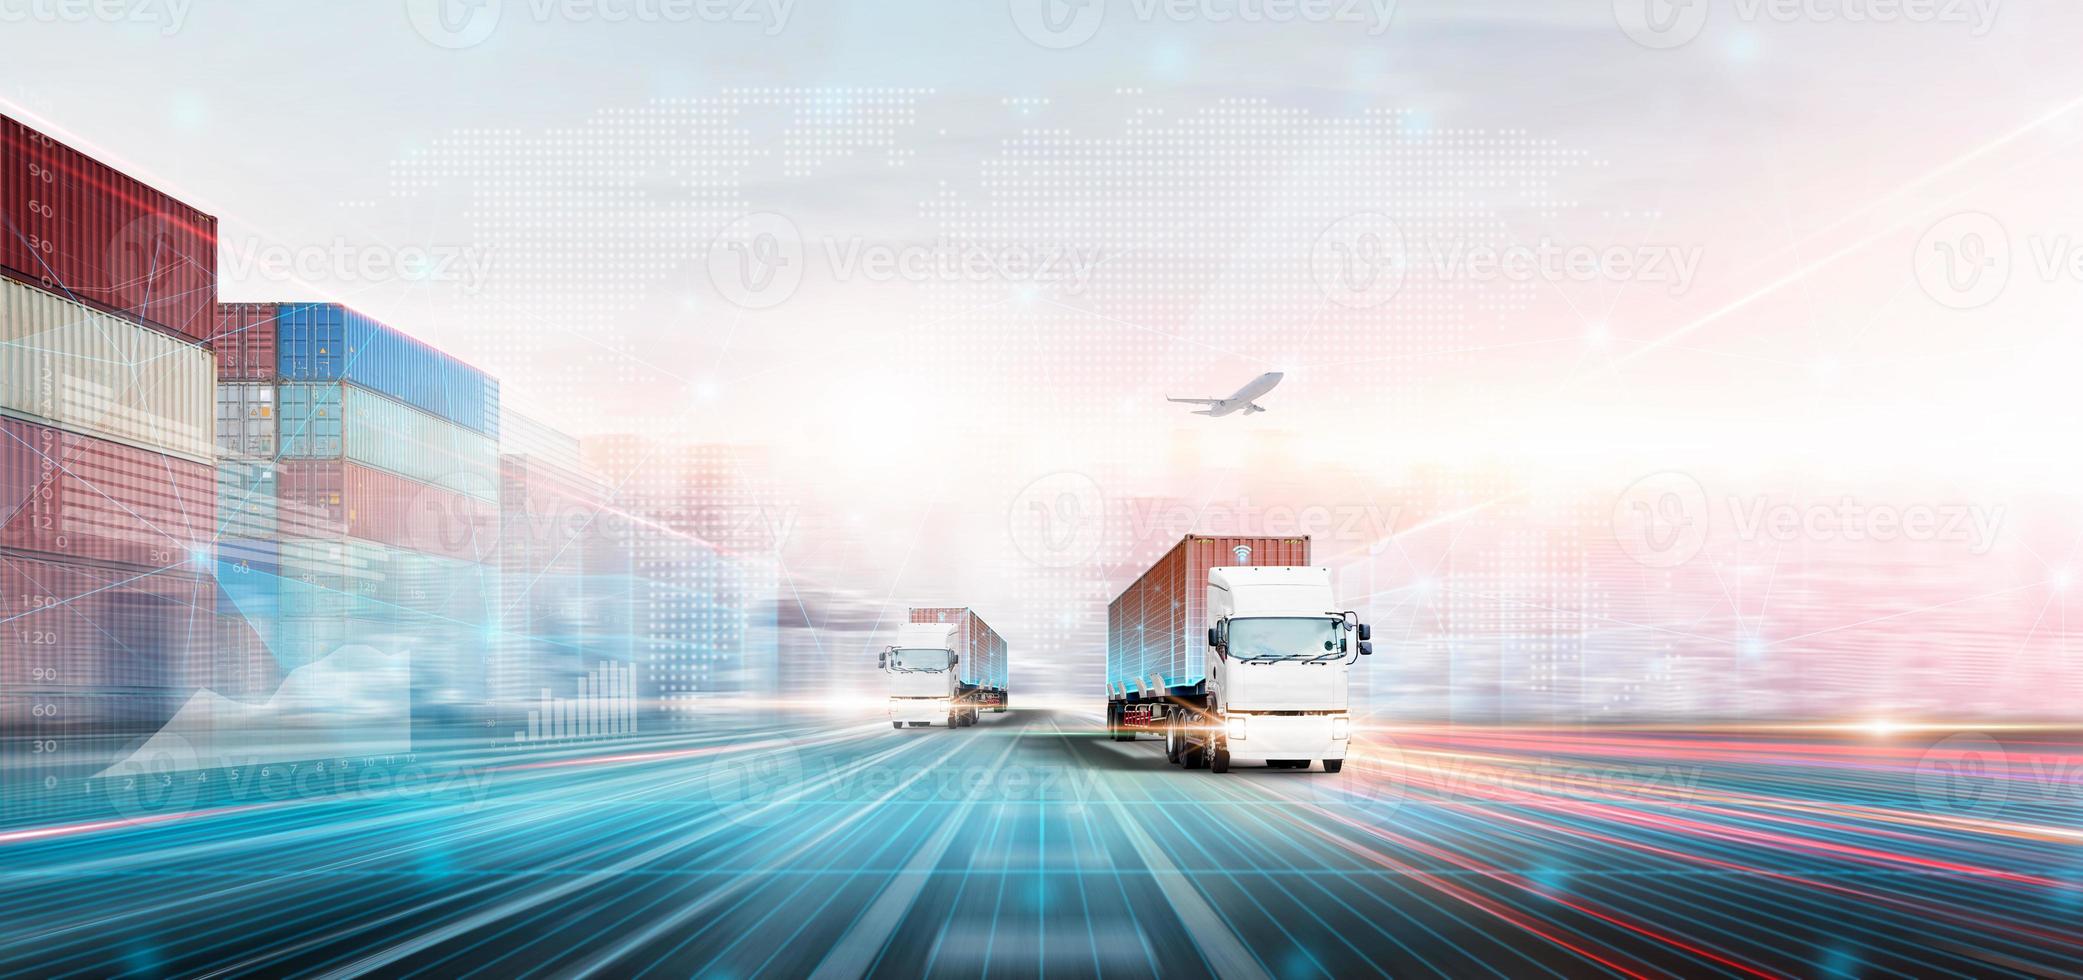 Technology Digital Future of Cargo Container Logistics Transport Concept, Double Exposure Polygon Wireframe of Container Freight Truck, Plane, Modern futuristic Import Export Transportation Background photo